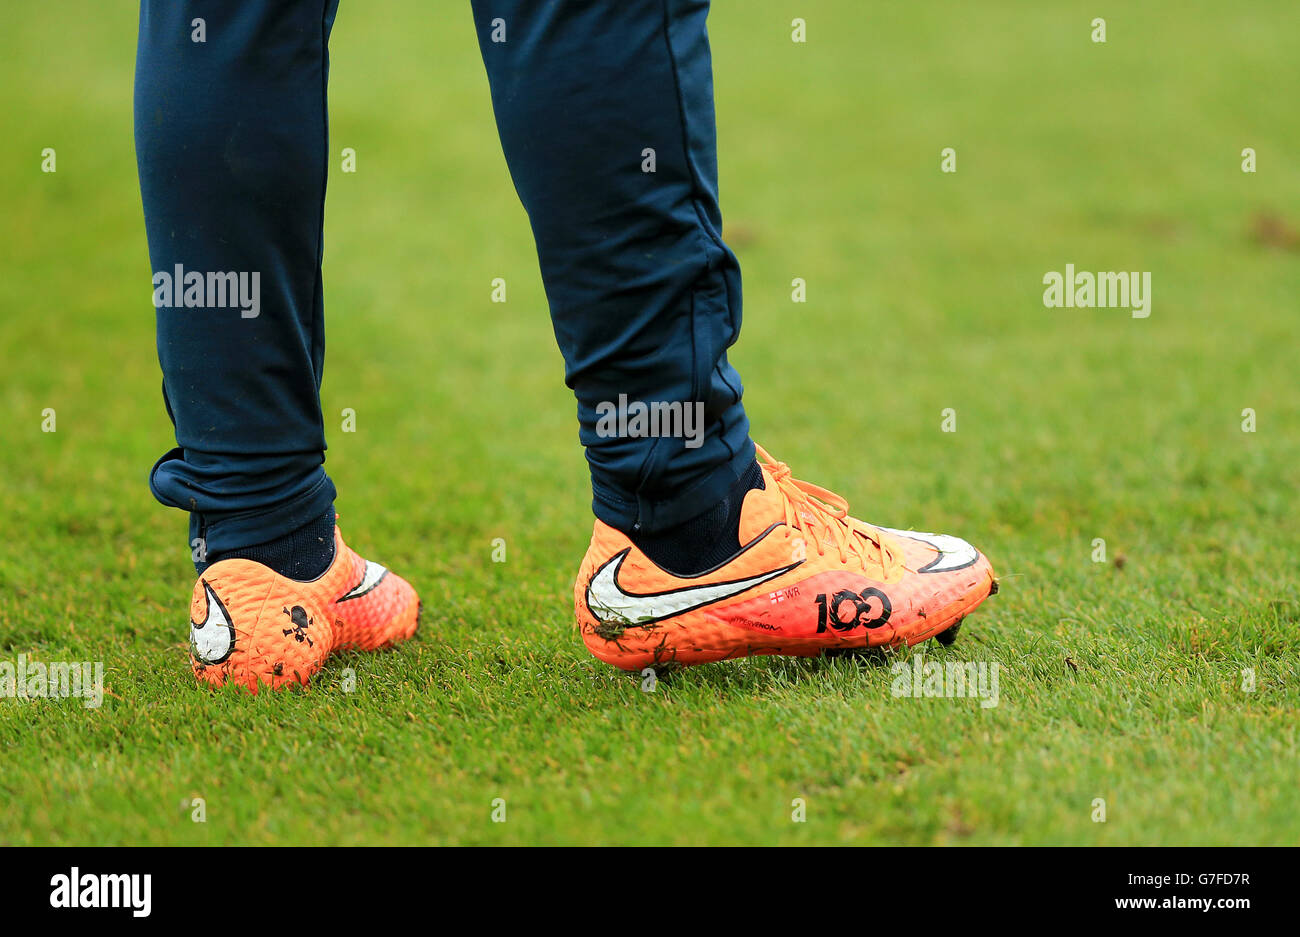 rooney football boots